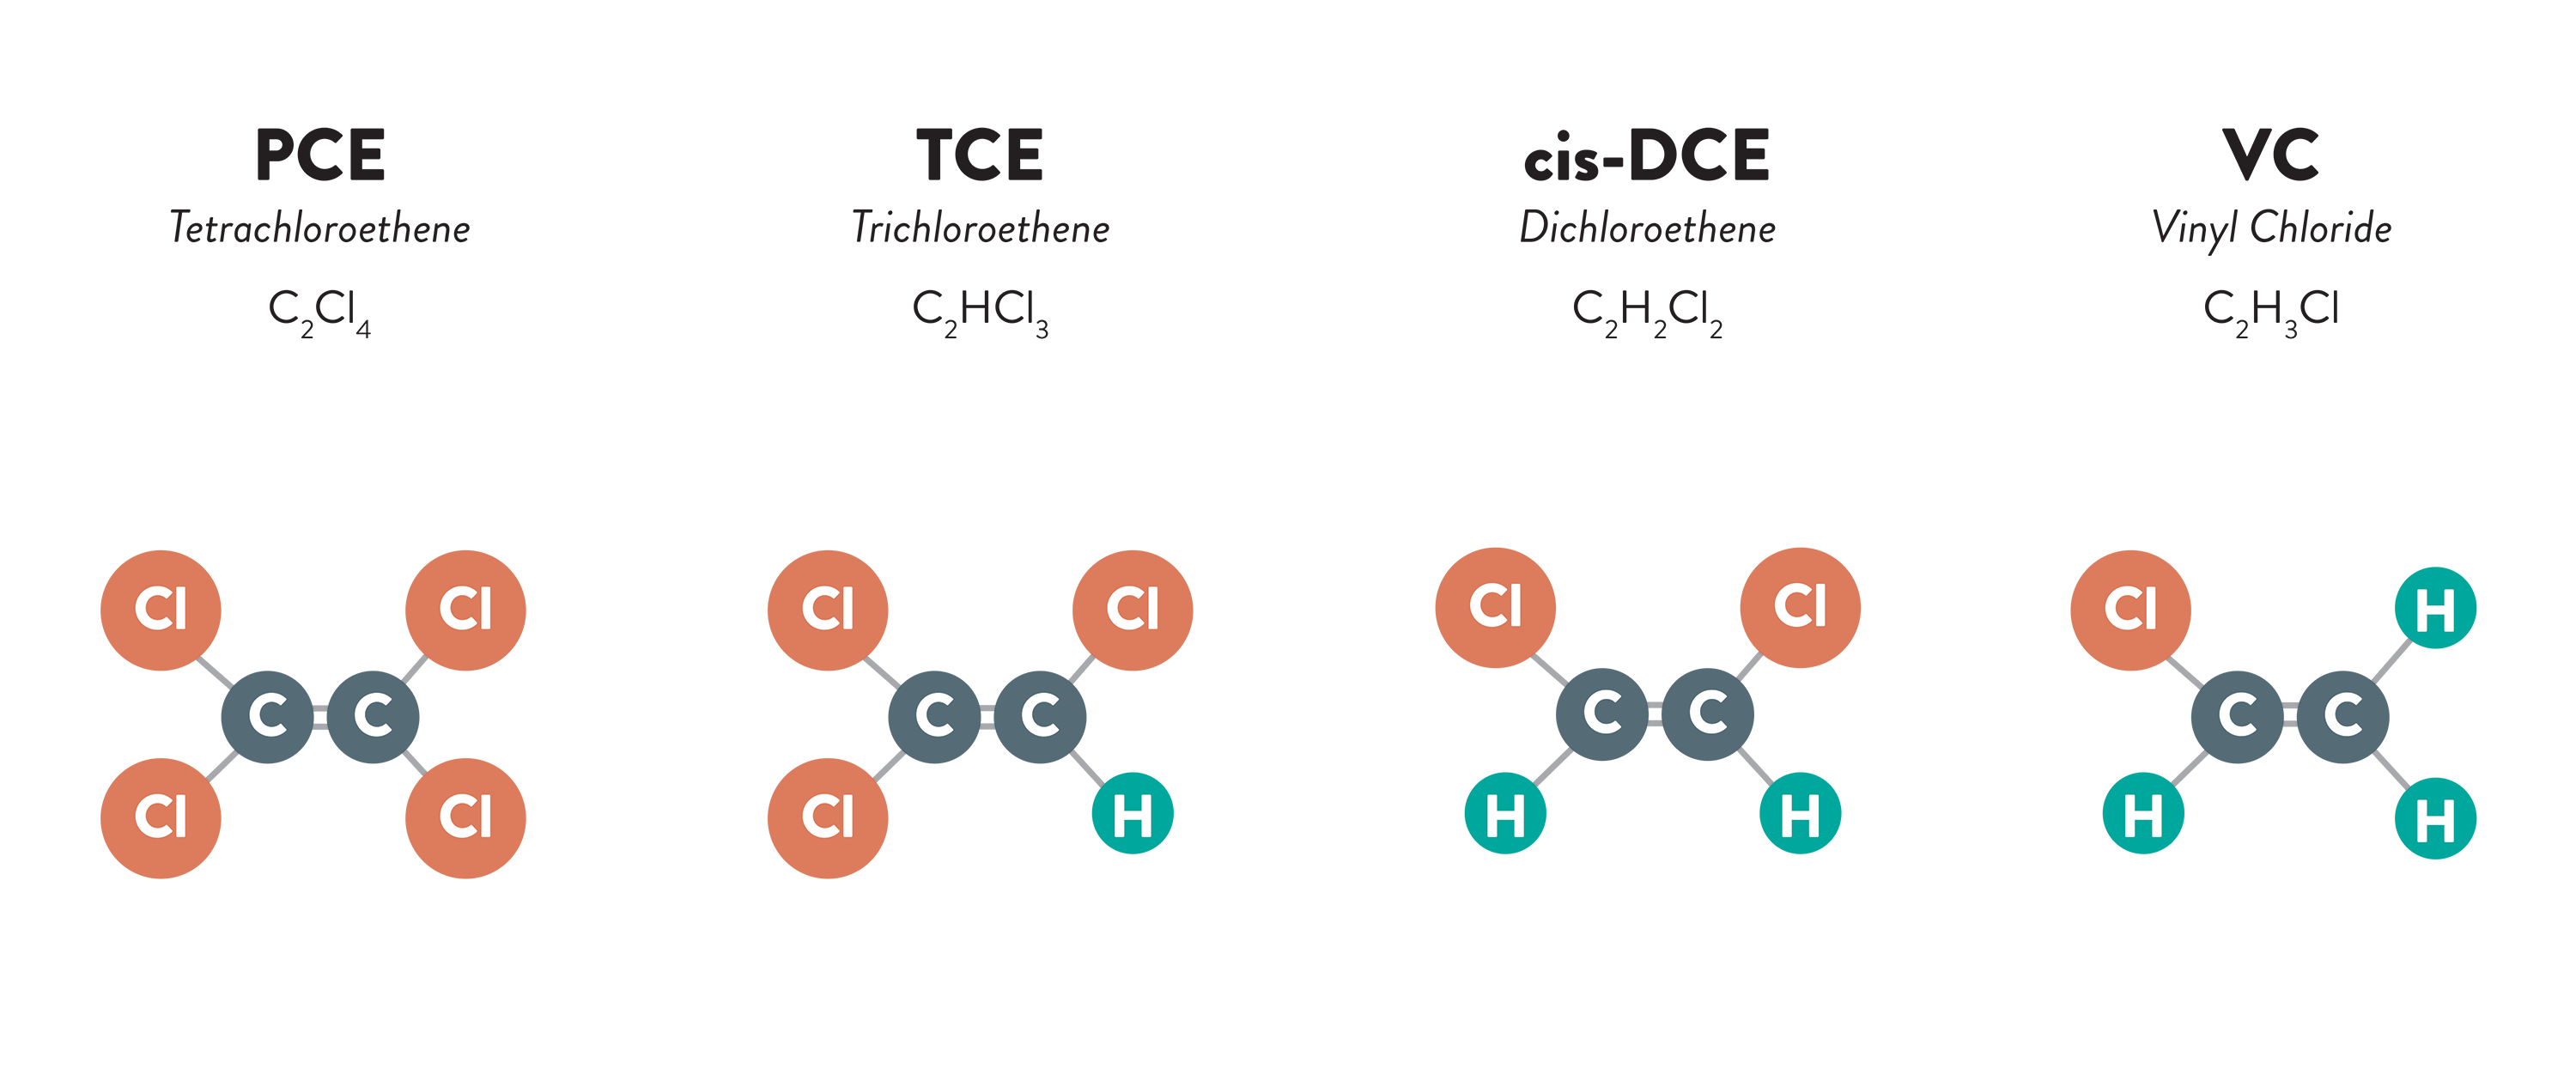 Chemical structure of Perc or PCE degrading into TCE, cis-DCE, and finally VC